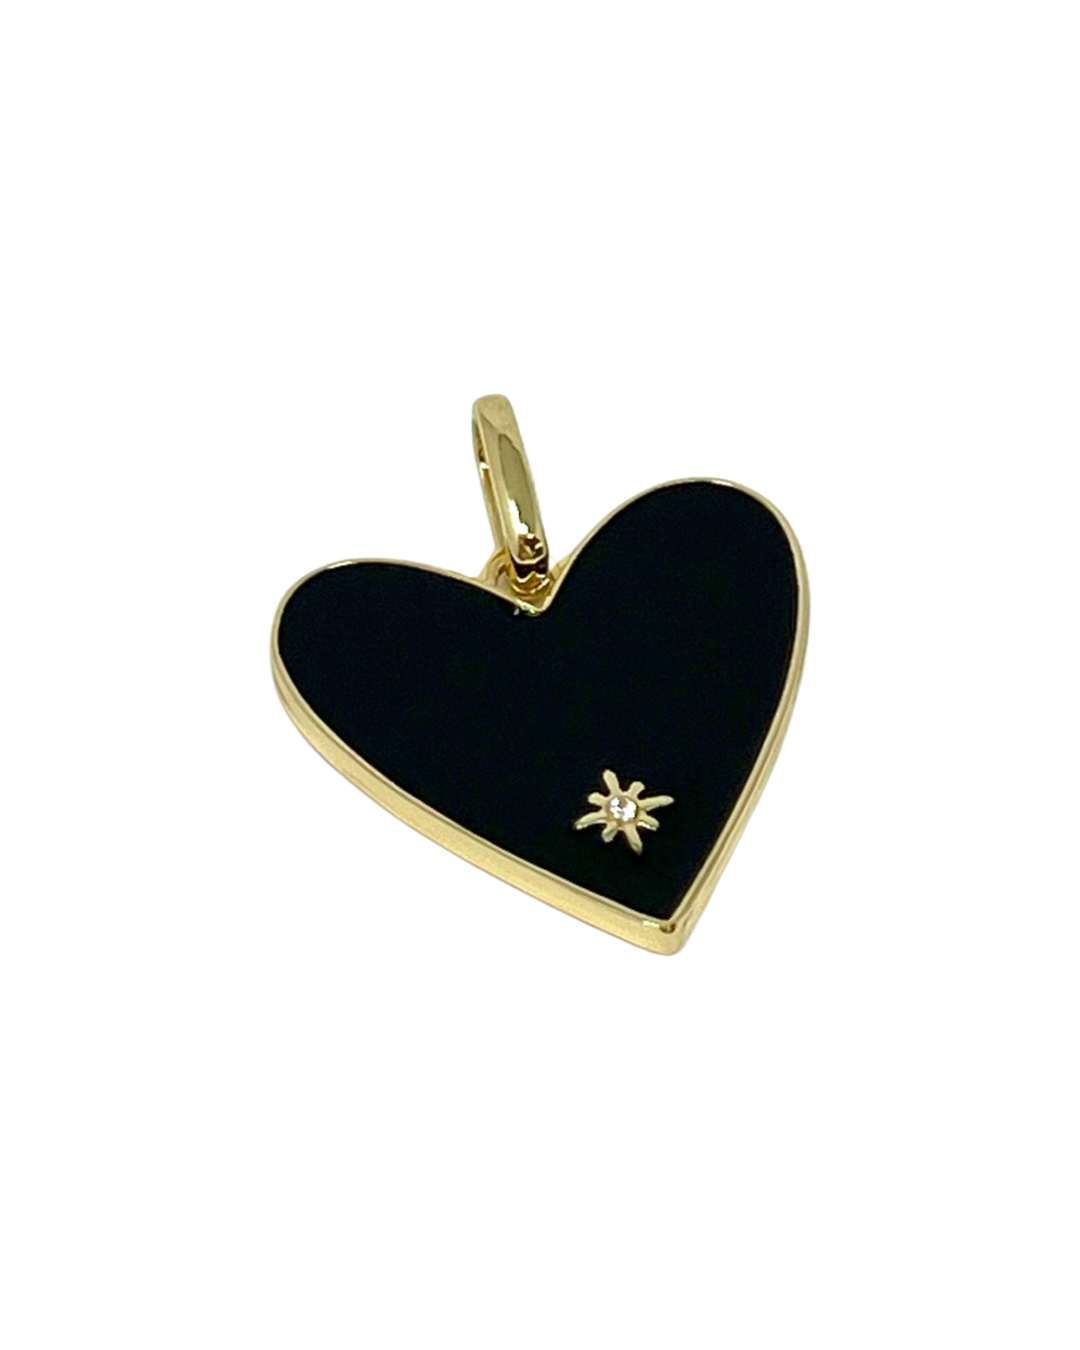 Charming Enamel Heart with Stone Charm in Black